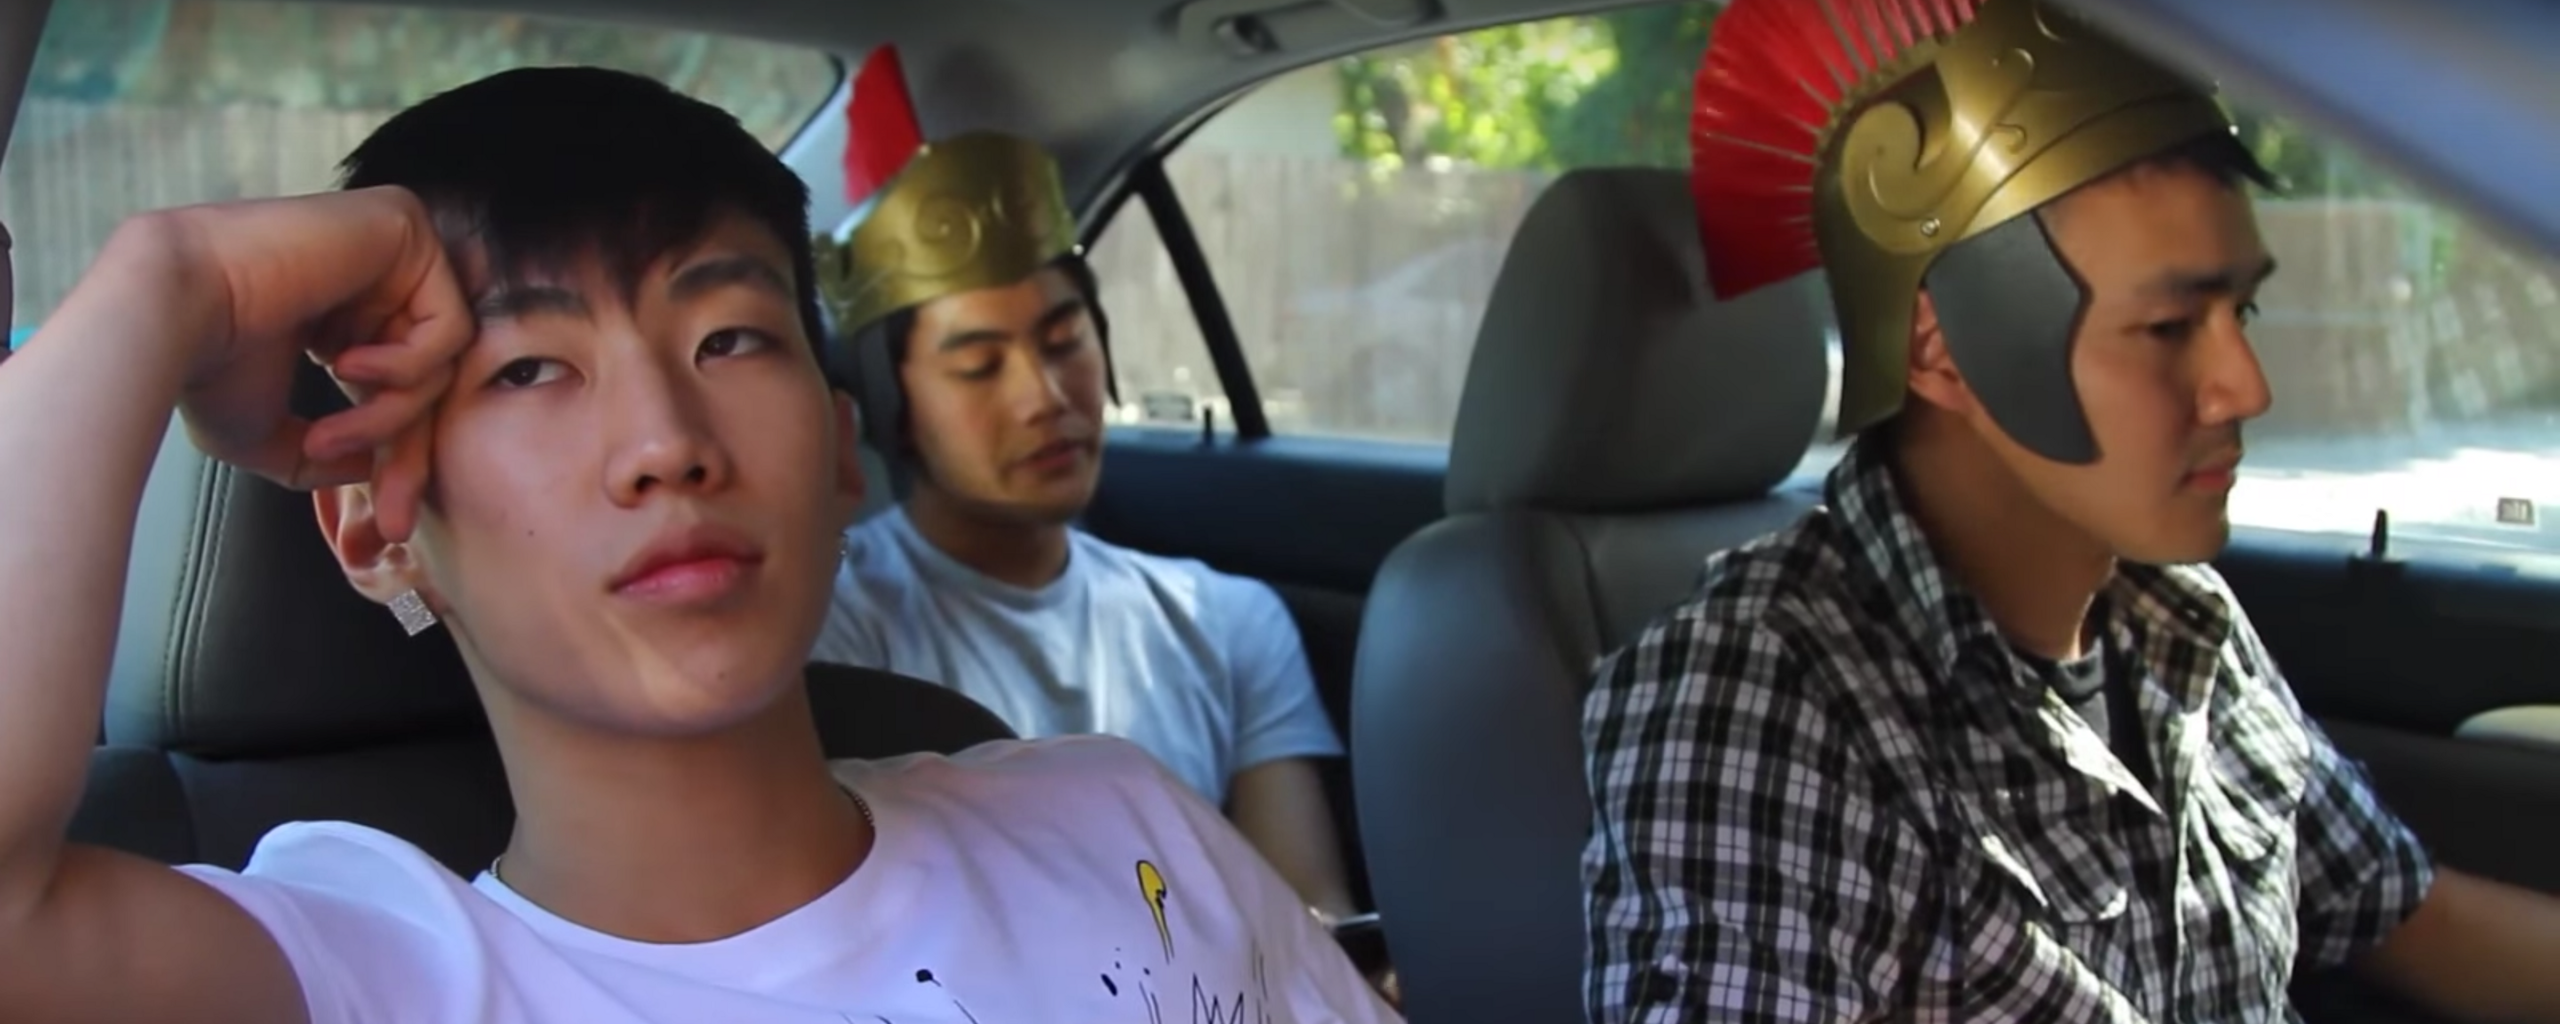 Three people sit in a car. Two wear plastic replicas of Roman legion helmets, while the other has his head on his hand.